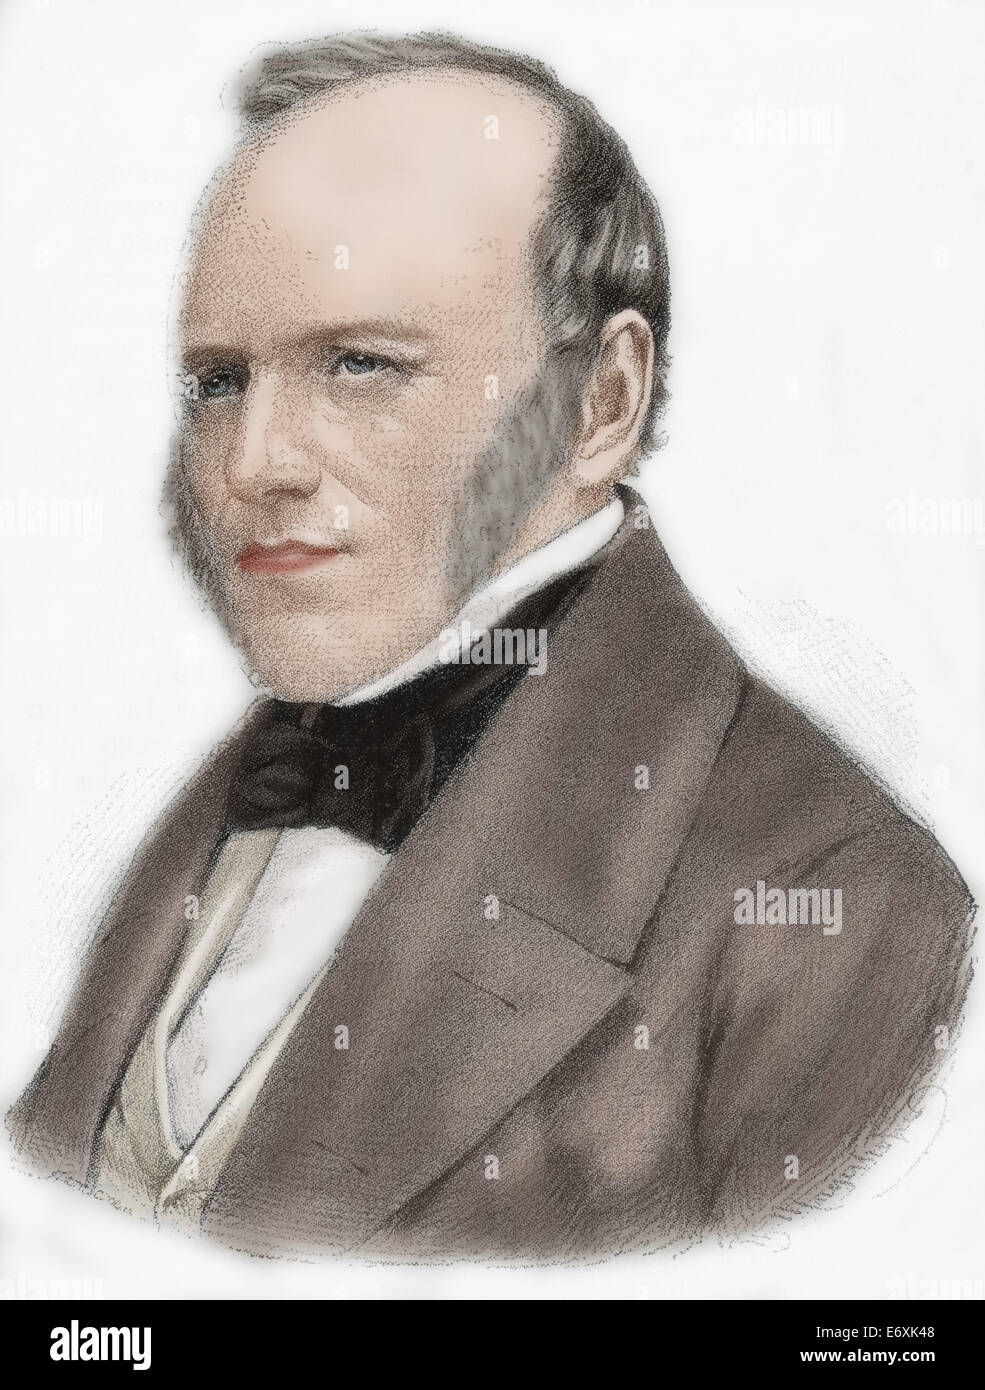 Charles Lyell (1797-1875). British lawyer and geologist. Engraving by Maynhofer in Our Century, 1883. Colored. Stock Photo